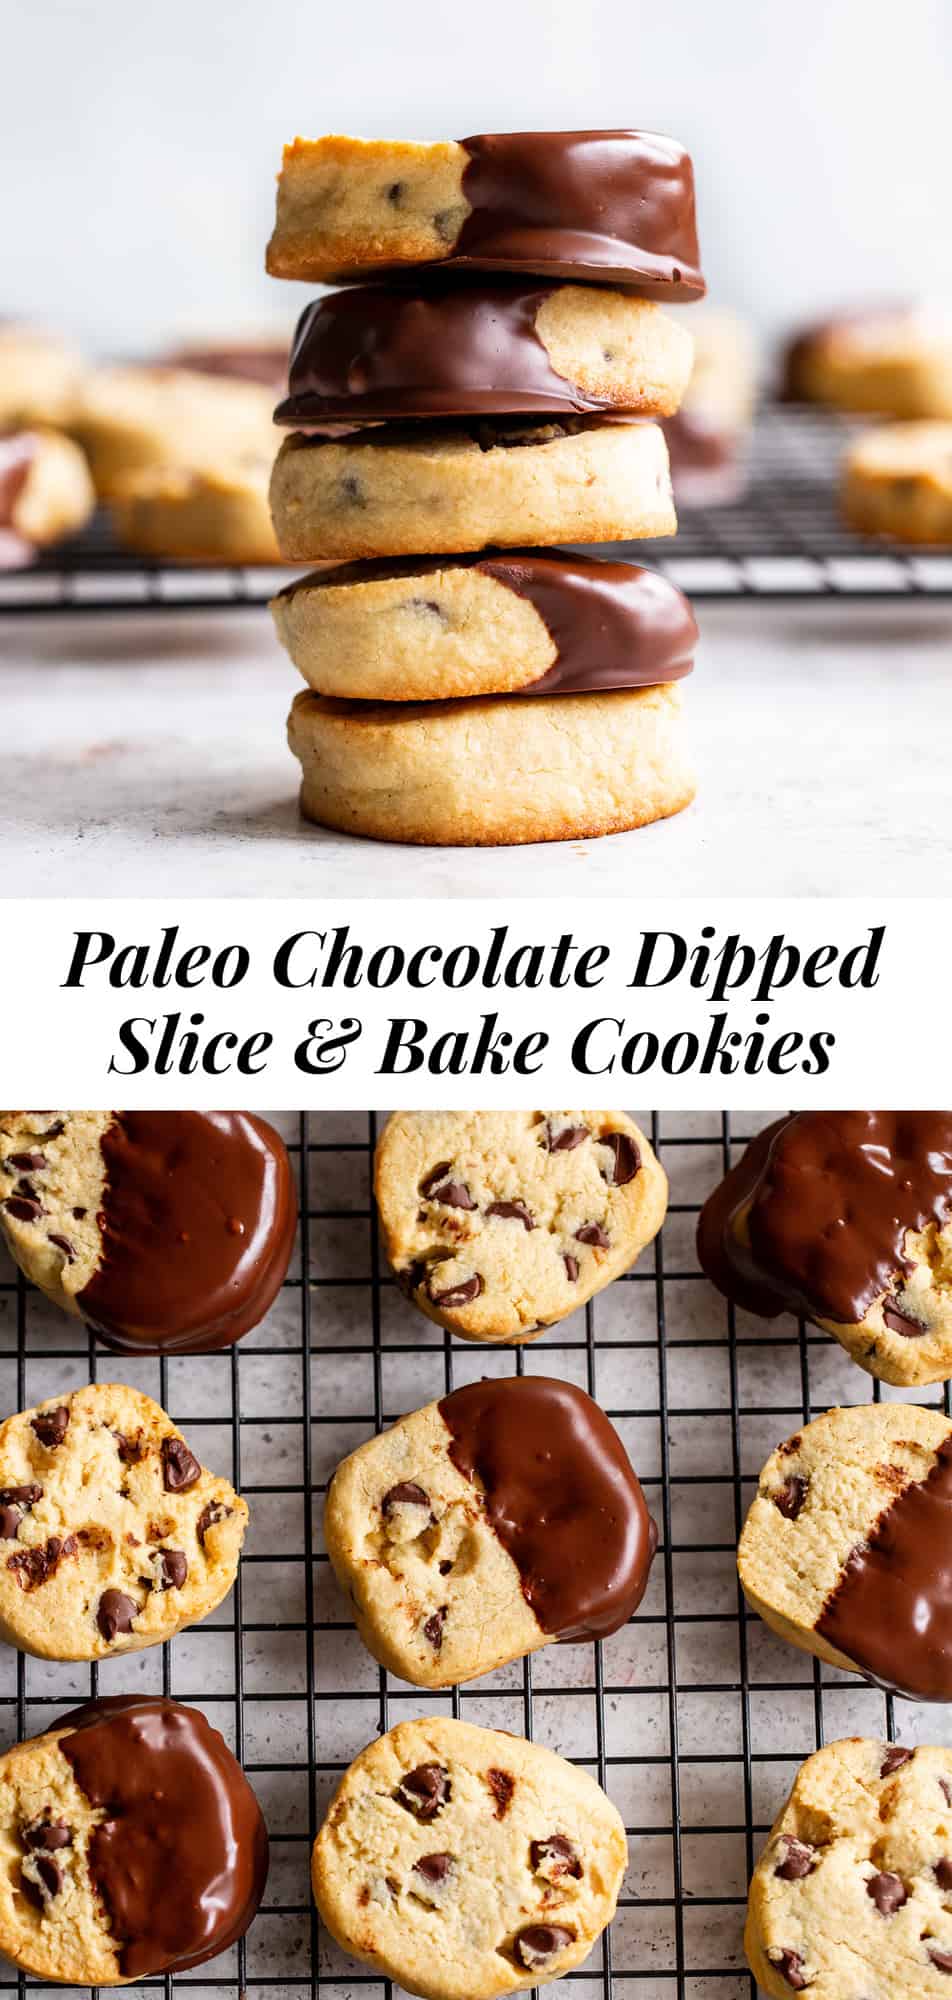 These paleo slice and bake cookies are surprisingly easy to make, studded with chocolate chips and dipped in chocolate! They’re grain free and refined sugar free with dairy free options. Perfect for holiday baking or anytime! #paleo #paleobaking #glutenfree #glutenfreebaking #cleaneating